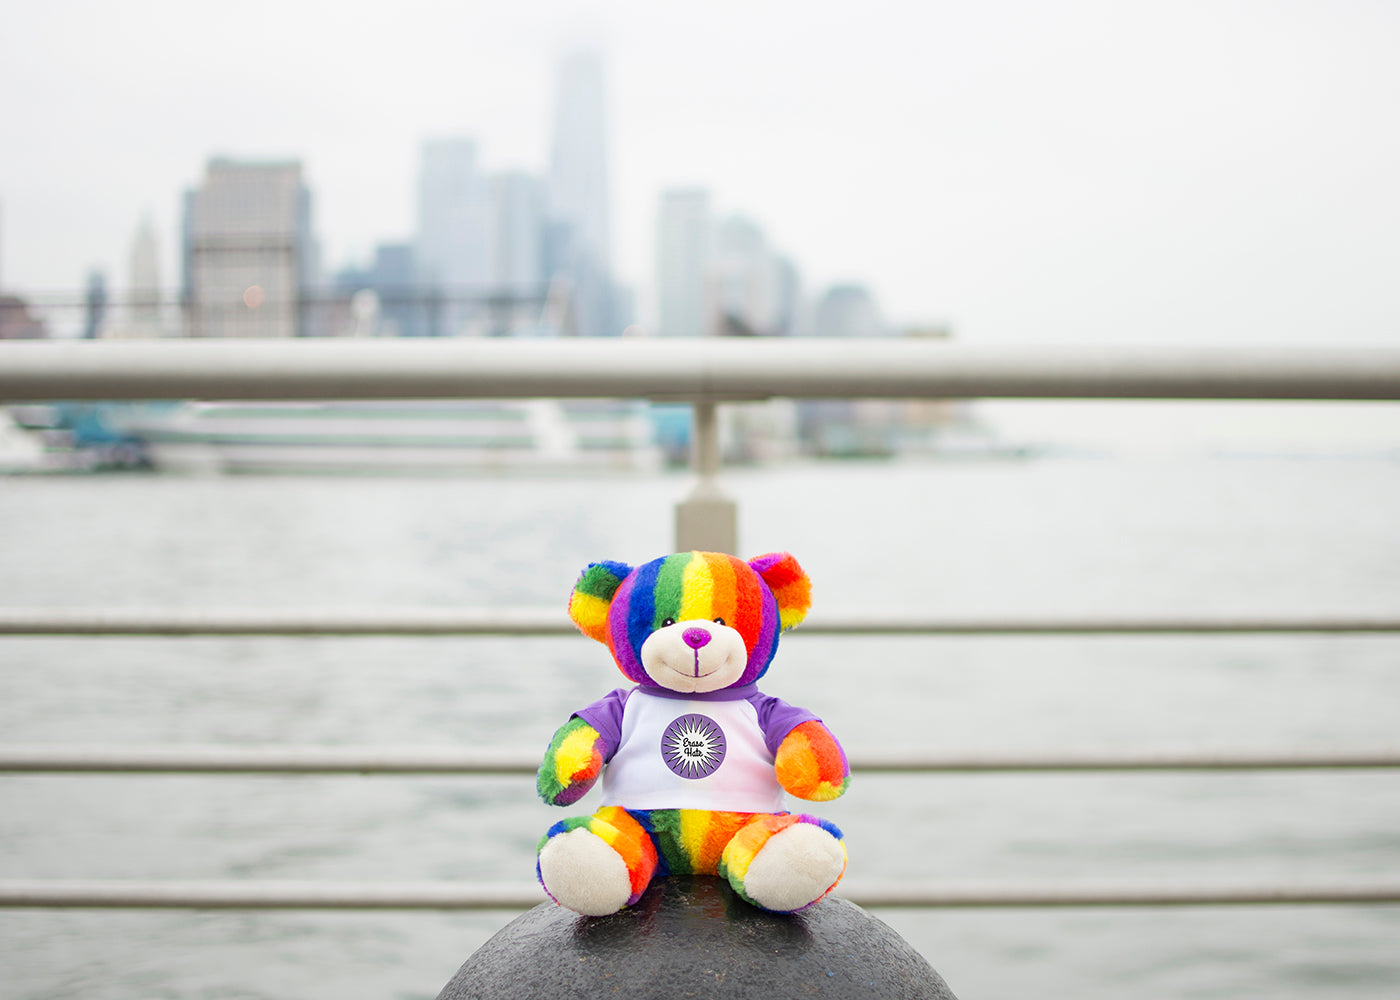 Bear Buggy®'s Totally Pride Bear photographed at the end of the Christopher St. Pier aka Pier 45 on the Hudson River where Marsha P. Johnson's body was found in July 1992.